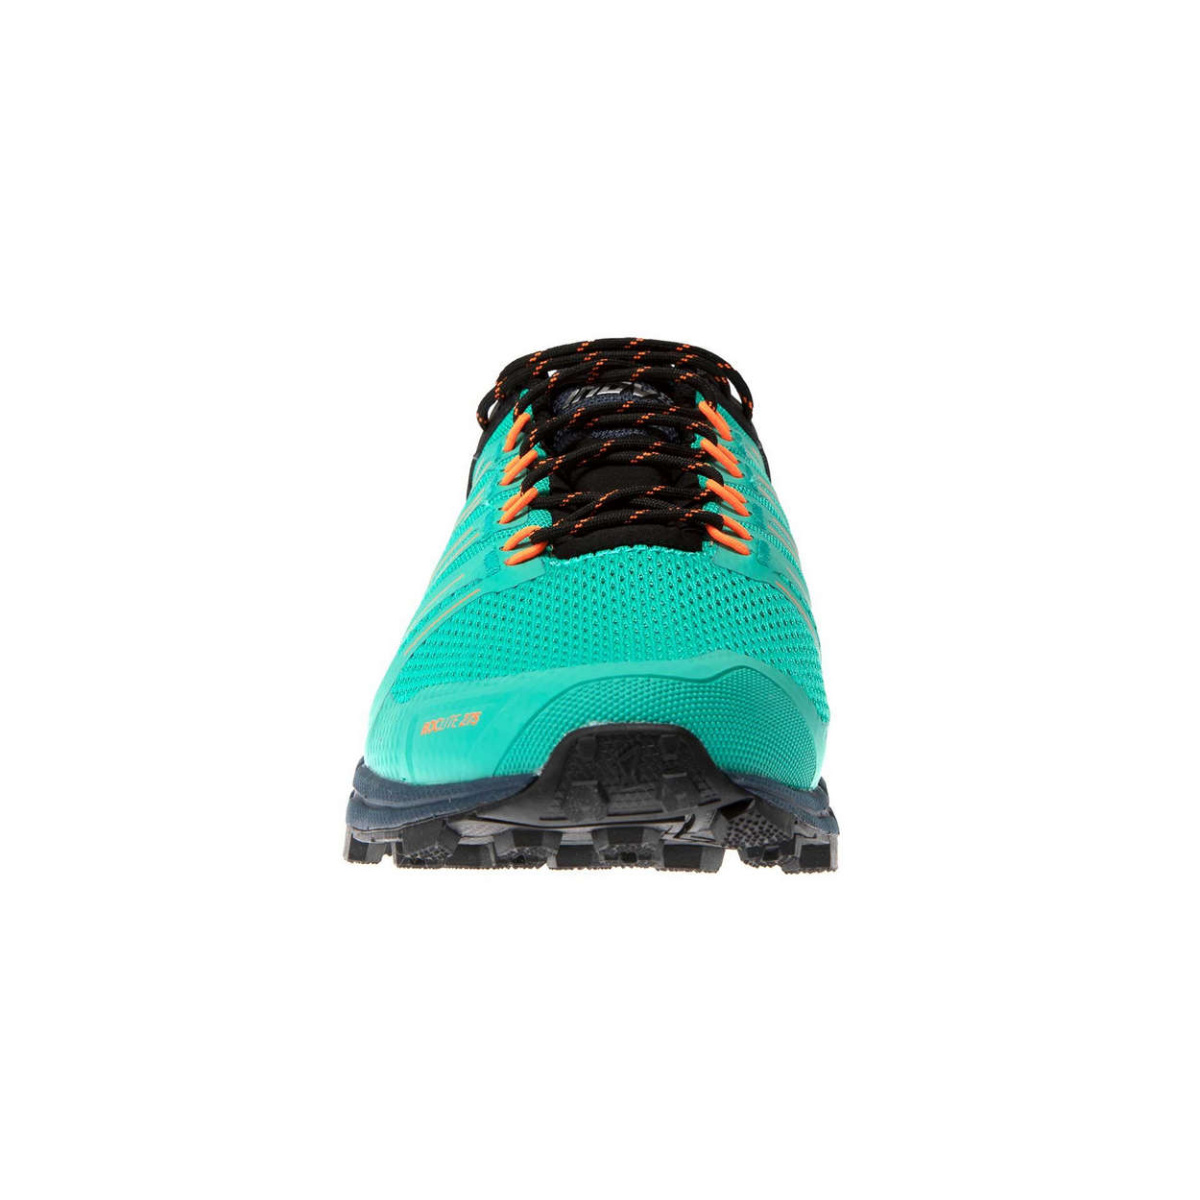 inov 8 womens Roclite G 275 teal trail running shoe Fast and Light CH 008